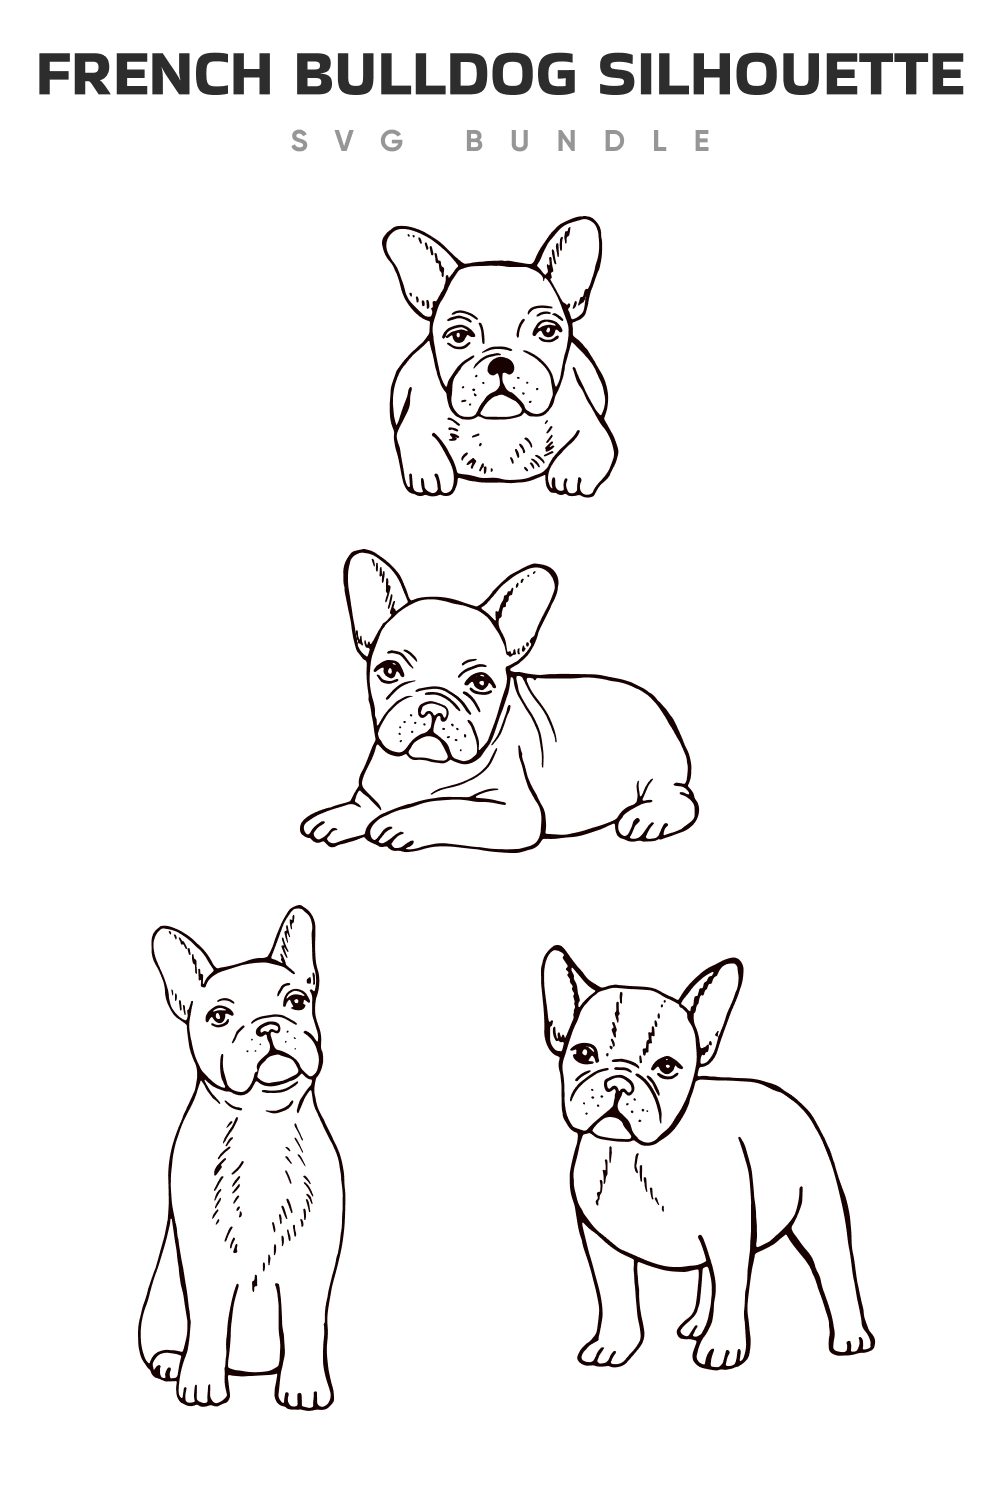 French bulldog silhouette in an outline style.